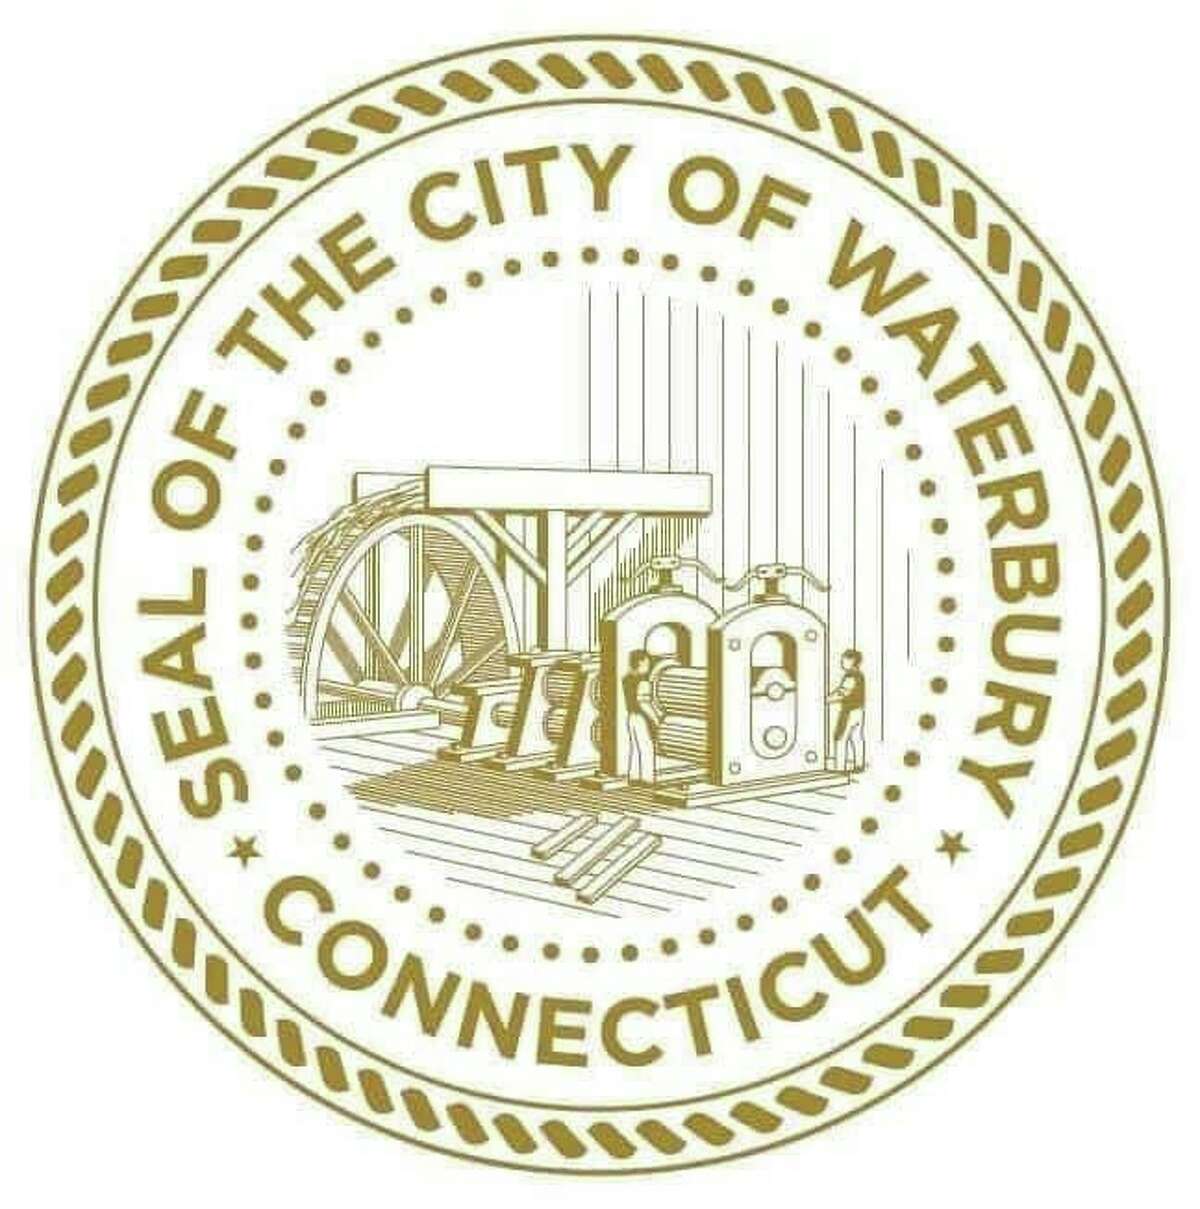 The seal of the City of Waterbury, Conn. The city recently entered into an agreement with the federal government to settle a complaint that some of the city’s polling locations were not accessible to people with disabilities.